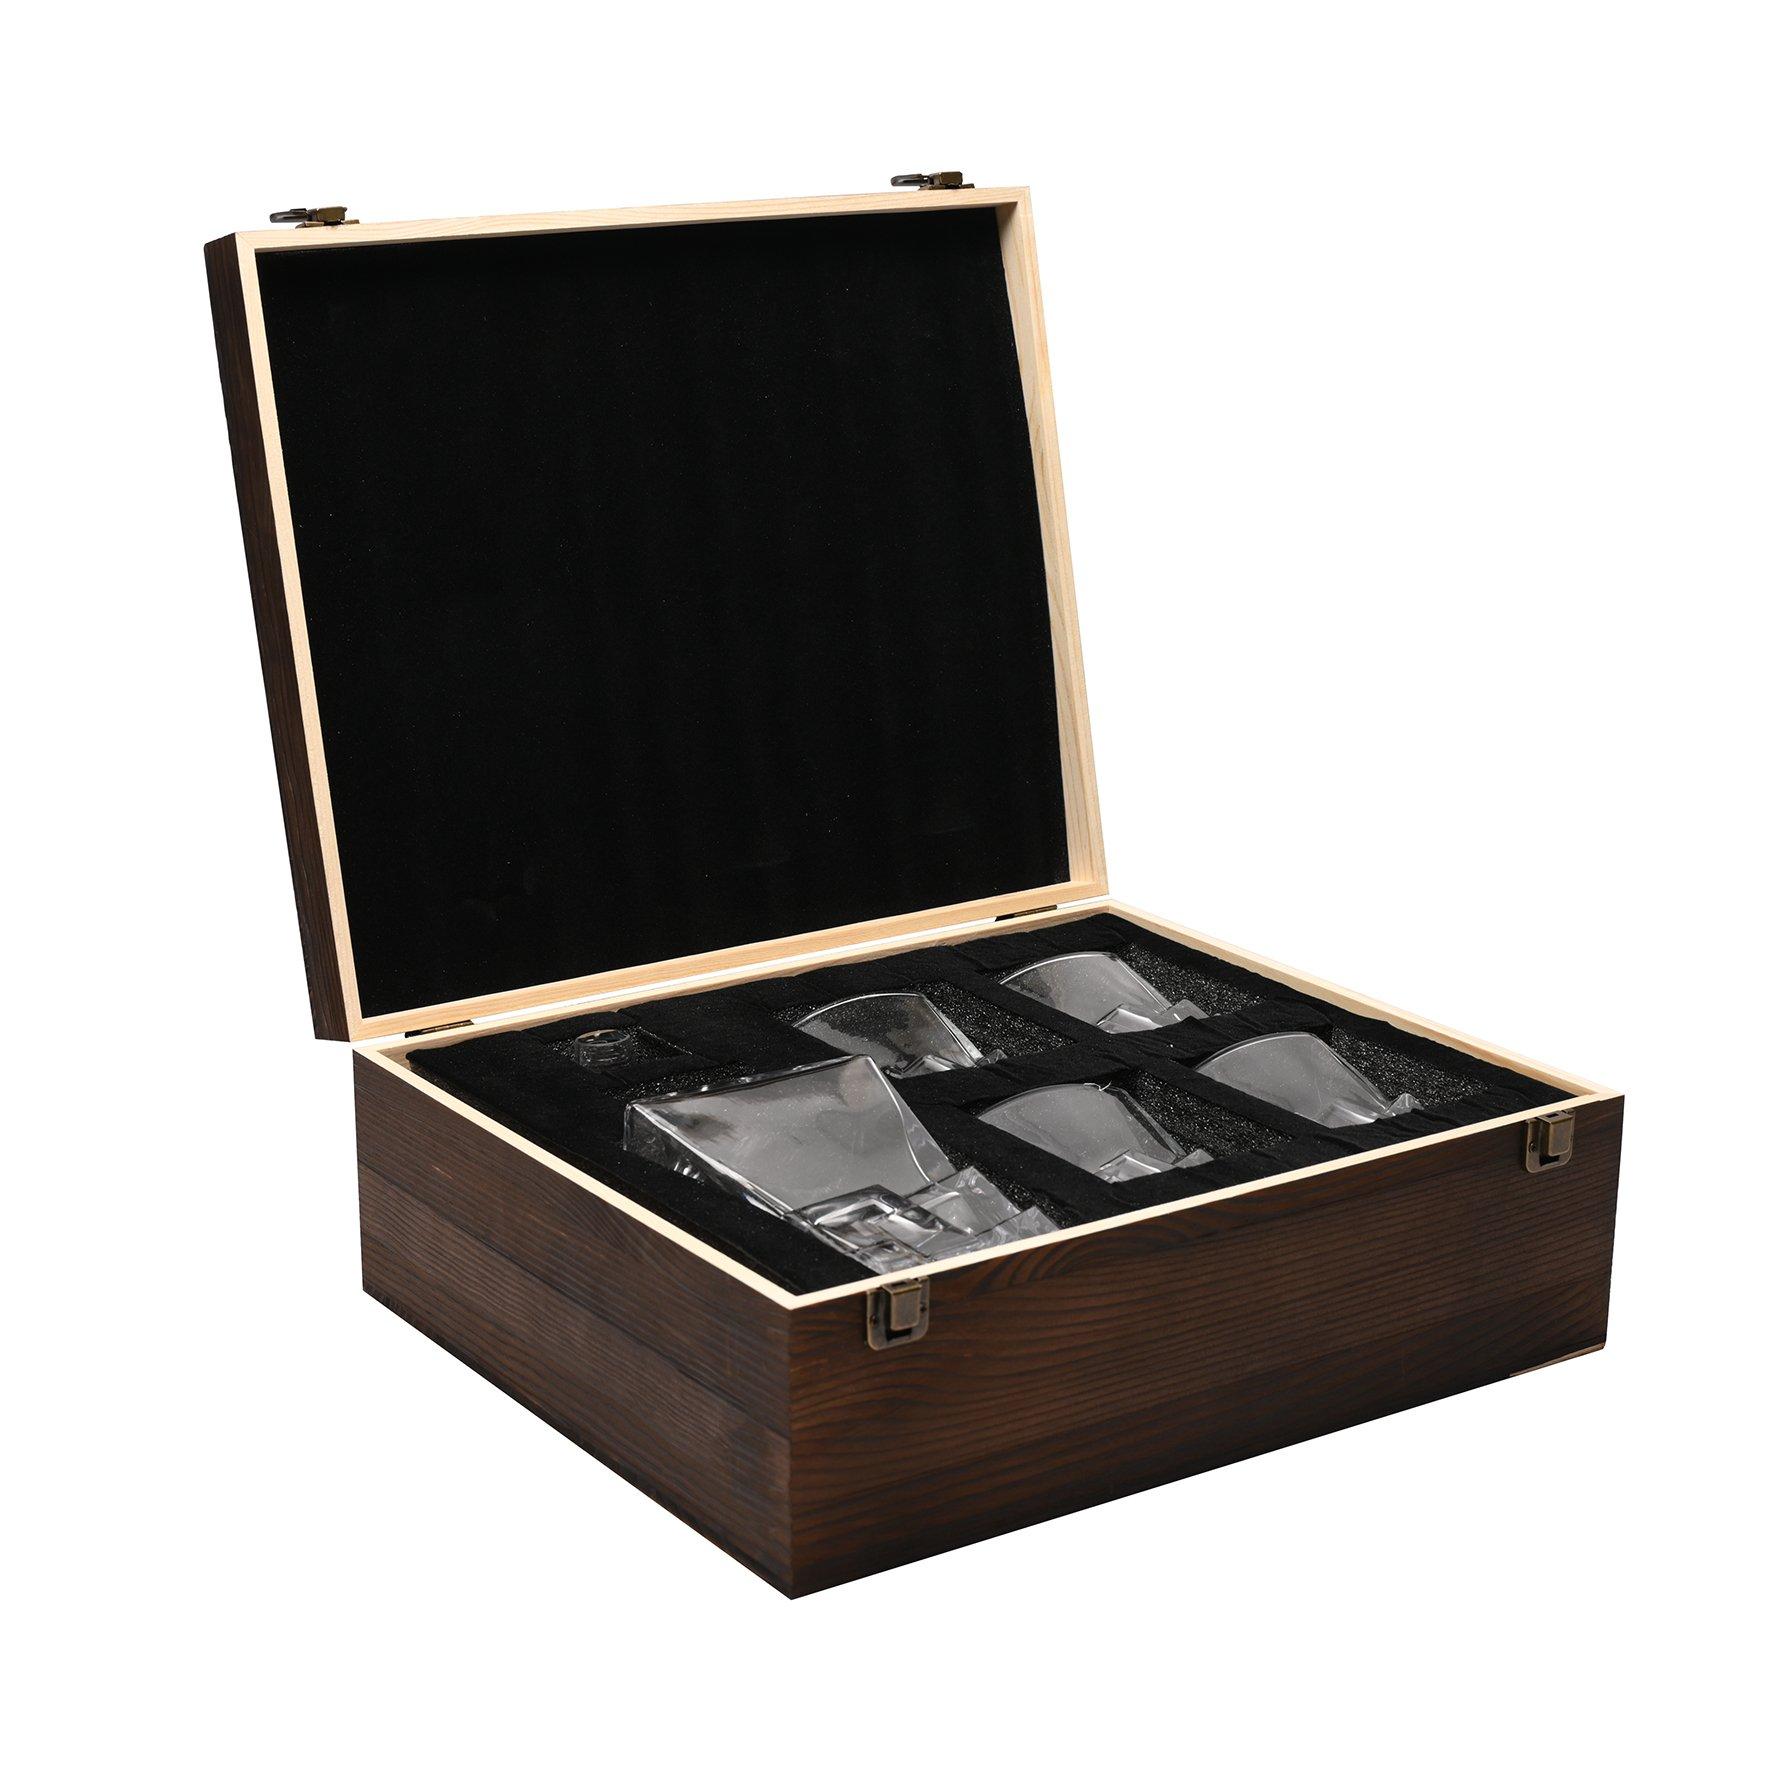 4 Whiskey Glasses & Decanter in Wooden Box